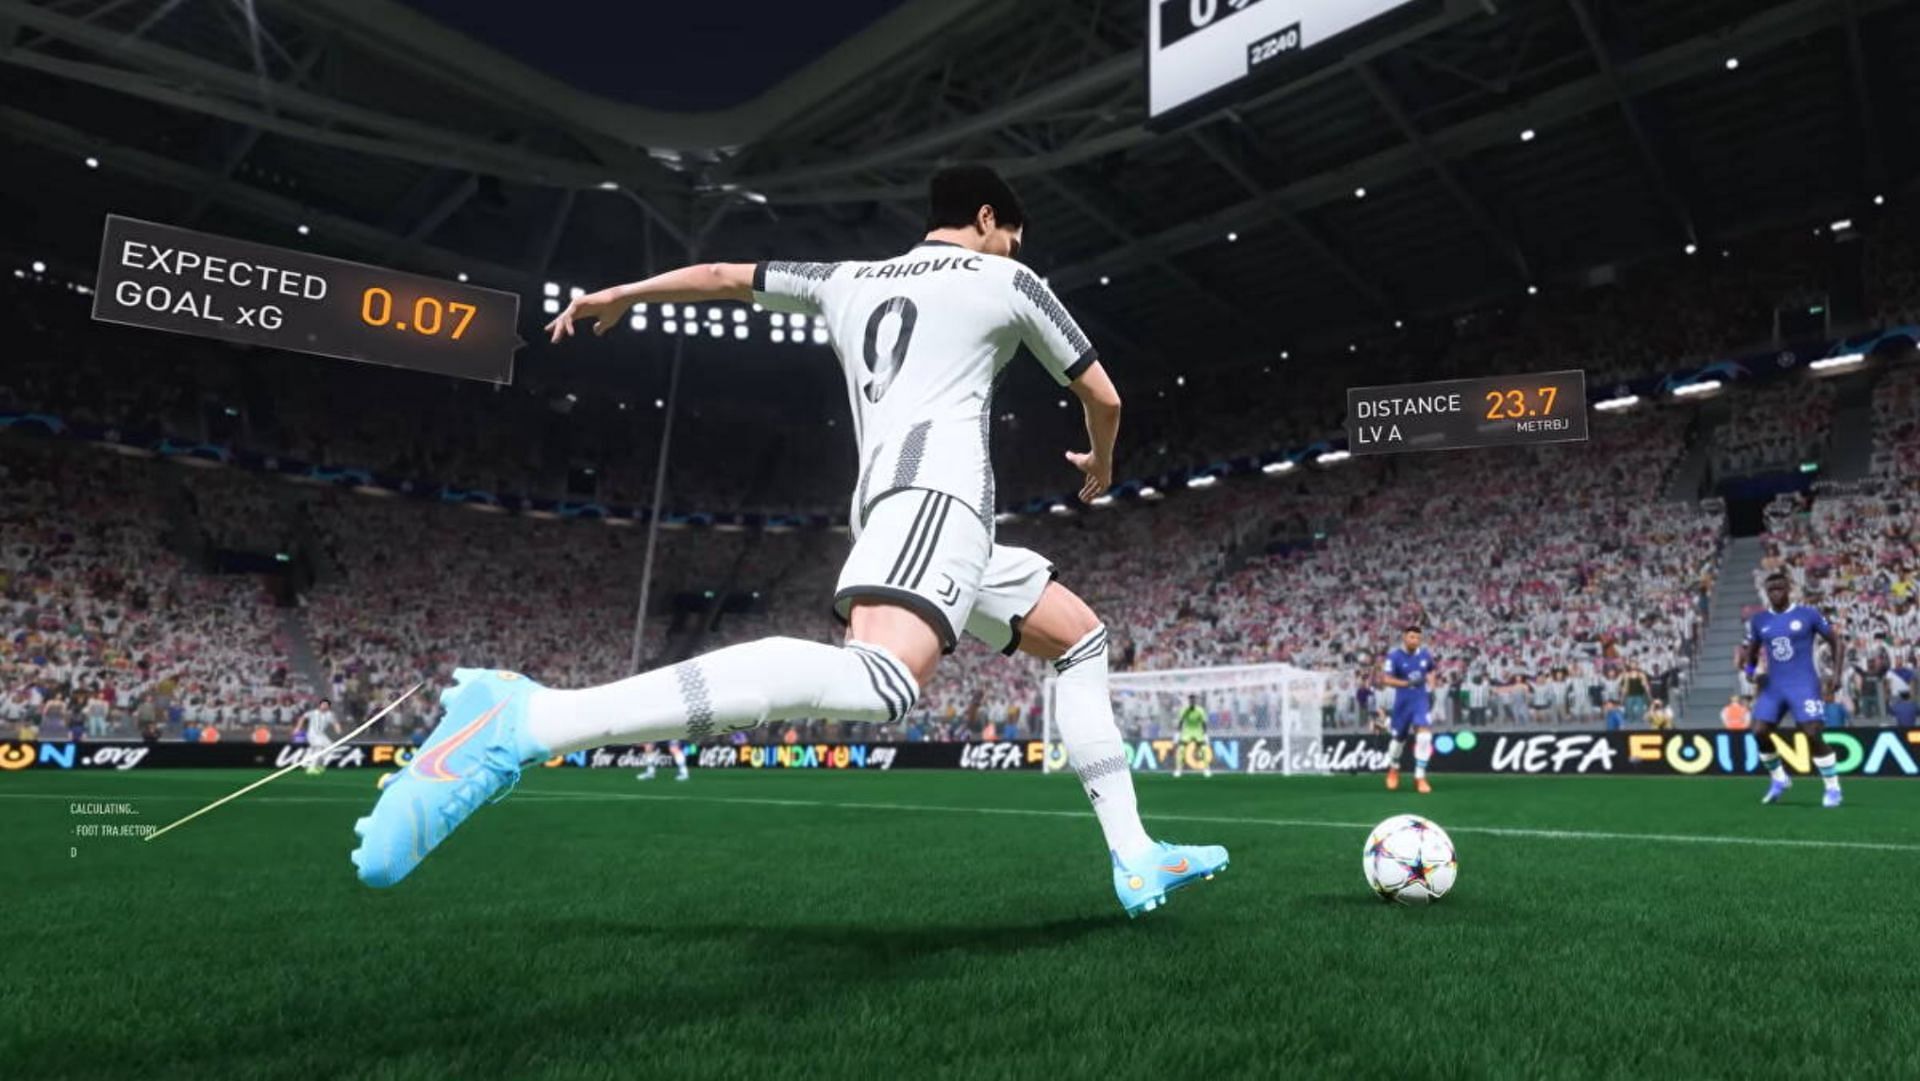 The power shot allows players to score from improbable areas (Image via EA Sports)